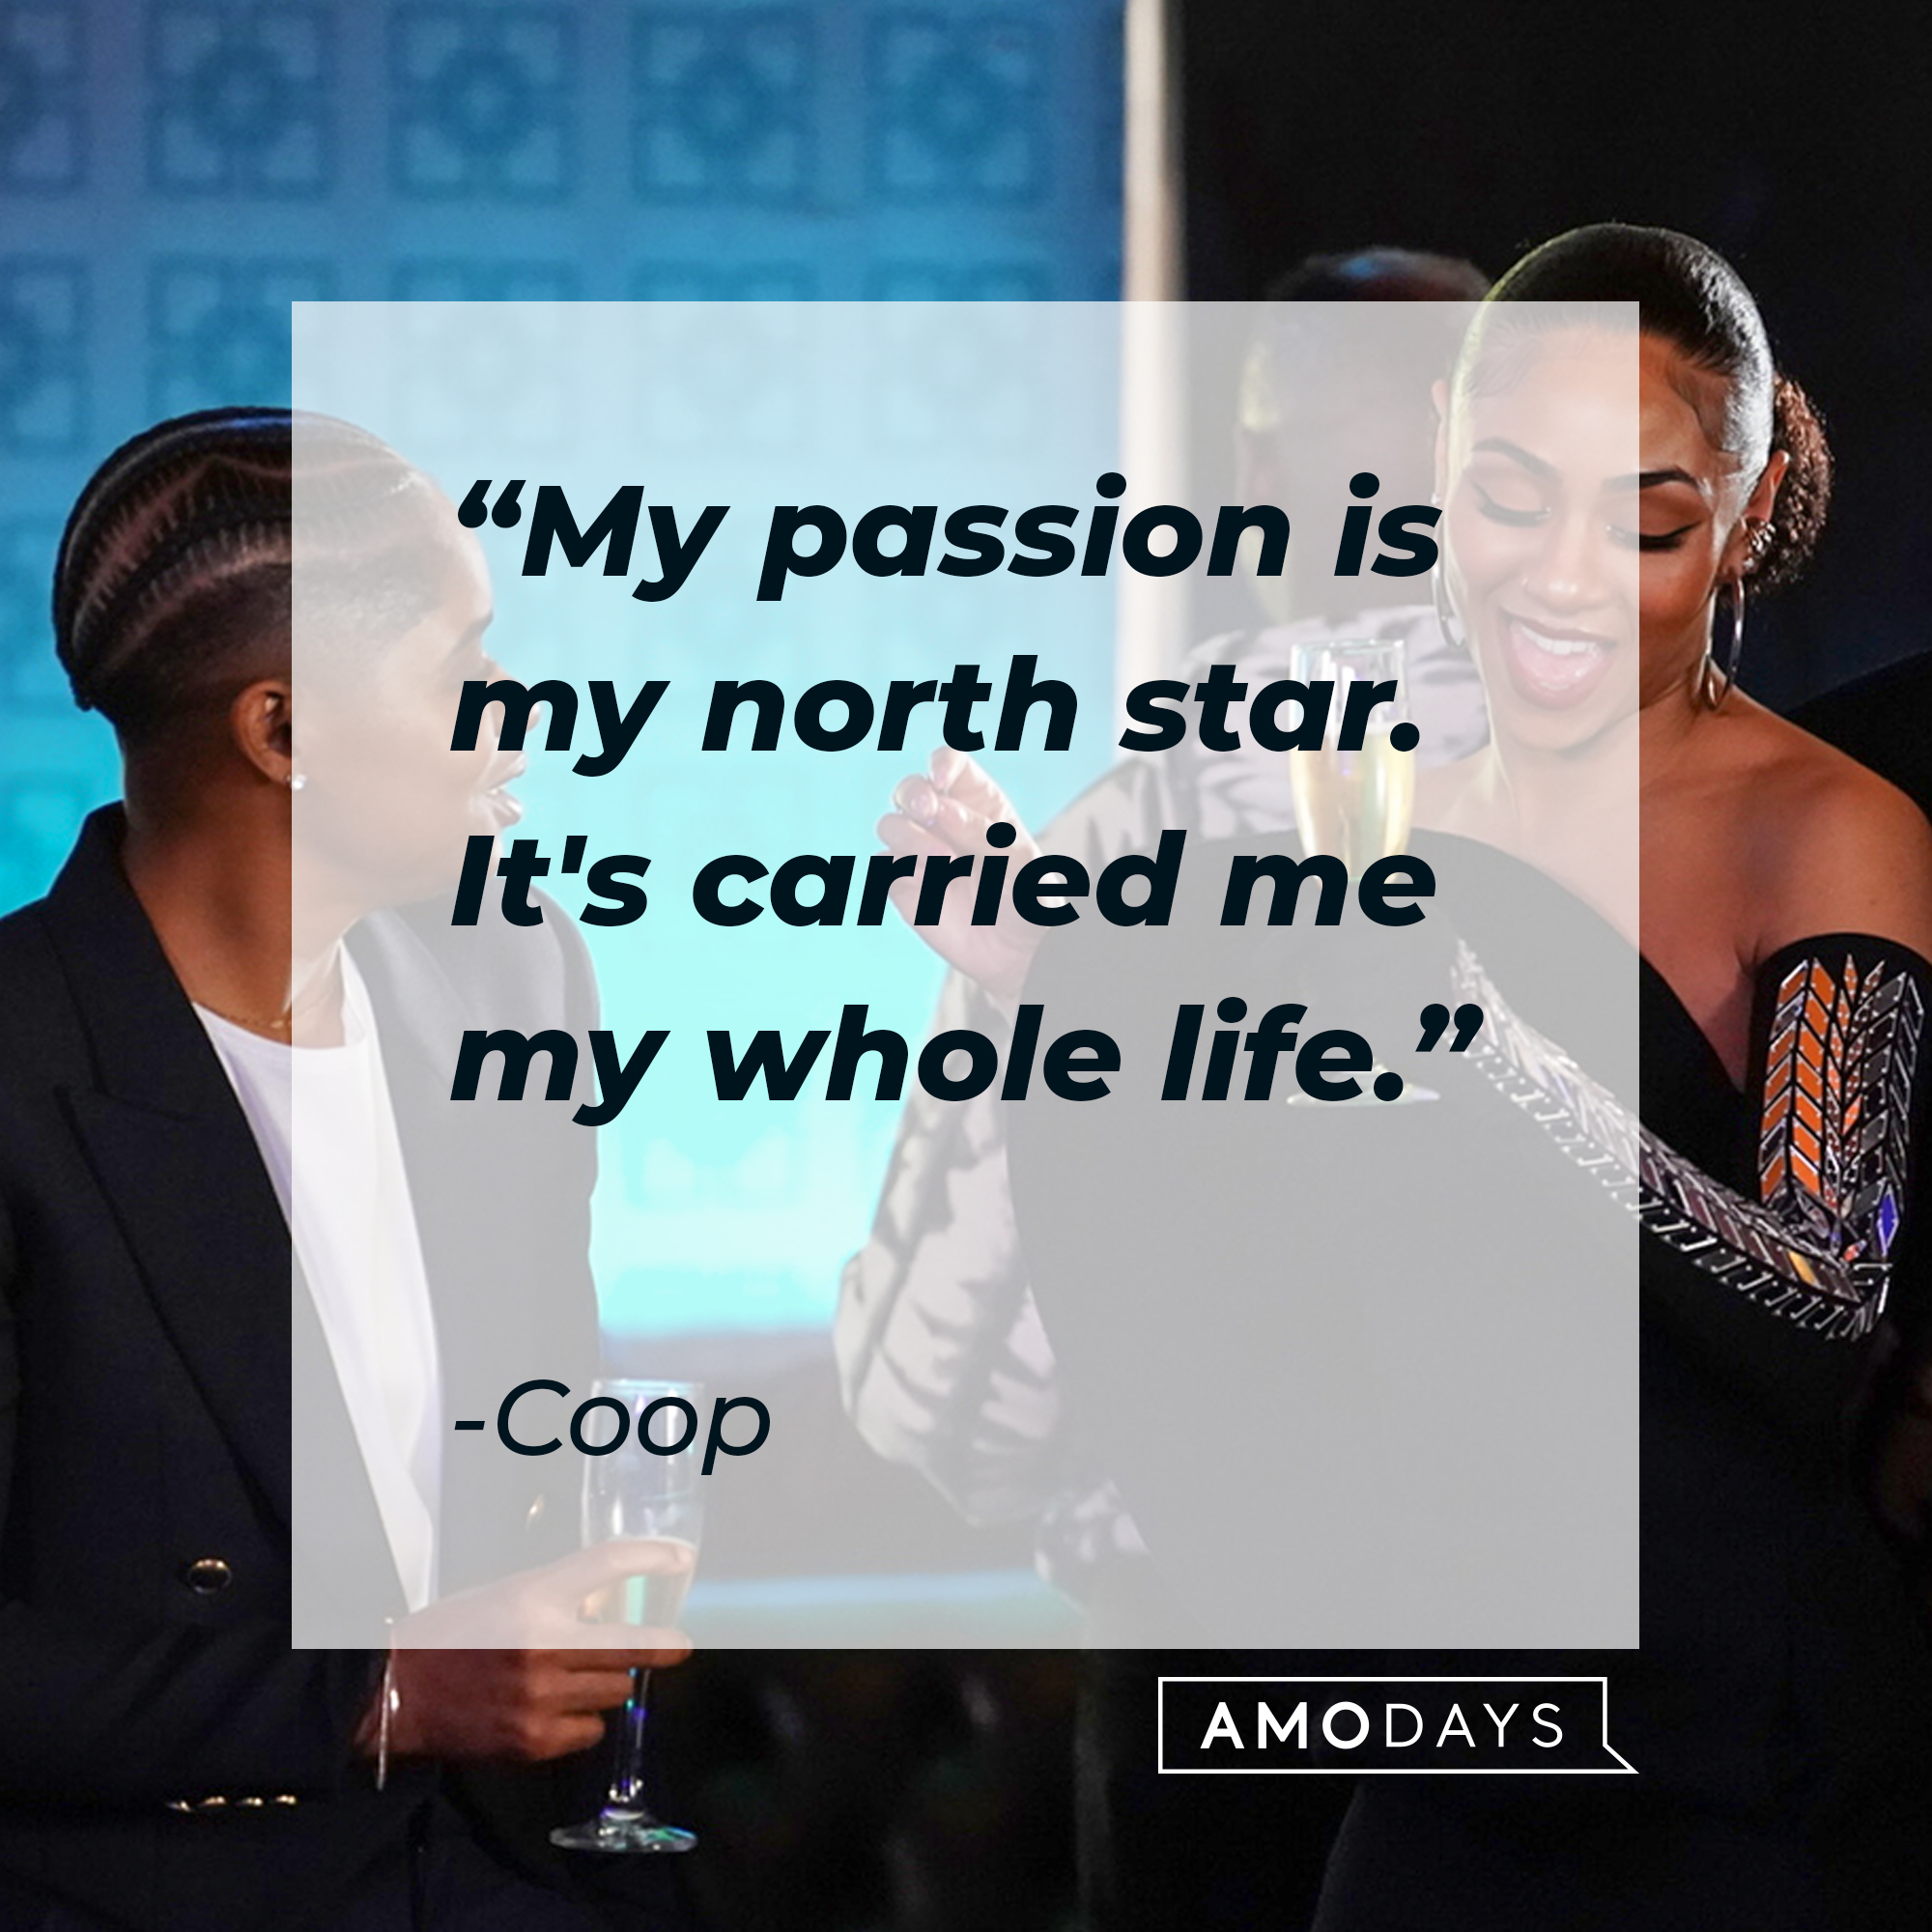 Coop's quote: "My passion is my north star. It's carried me my whole life." | Source: facebook.com/CWAllAmerican